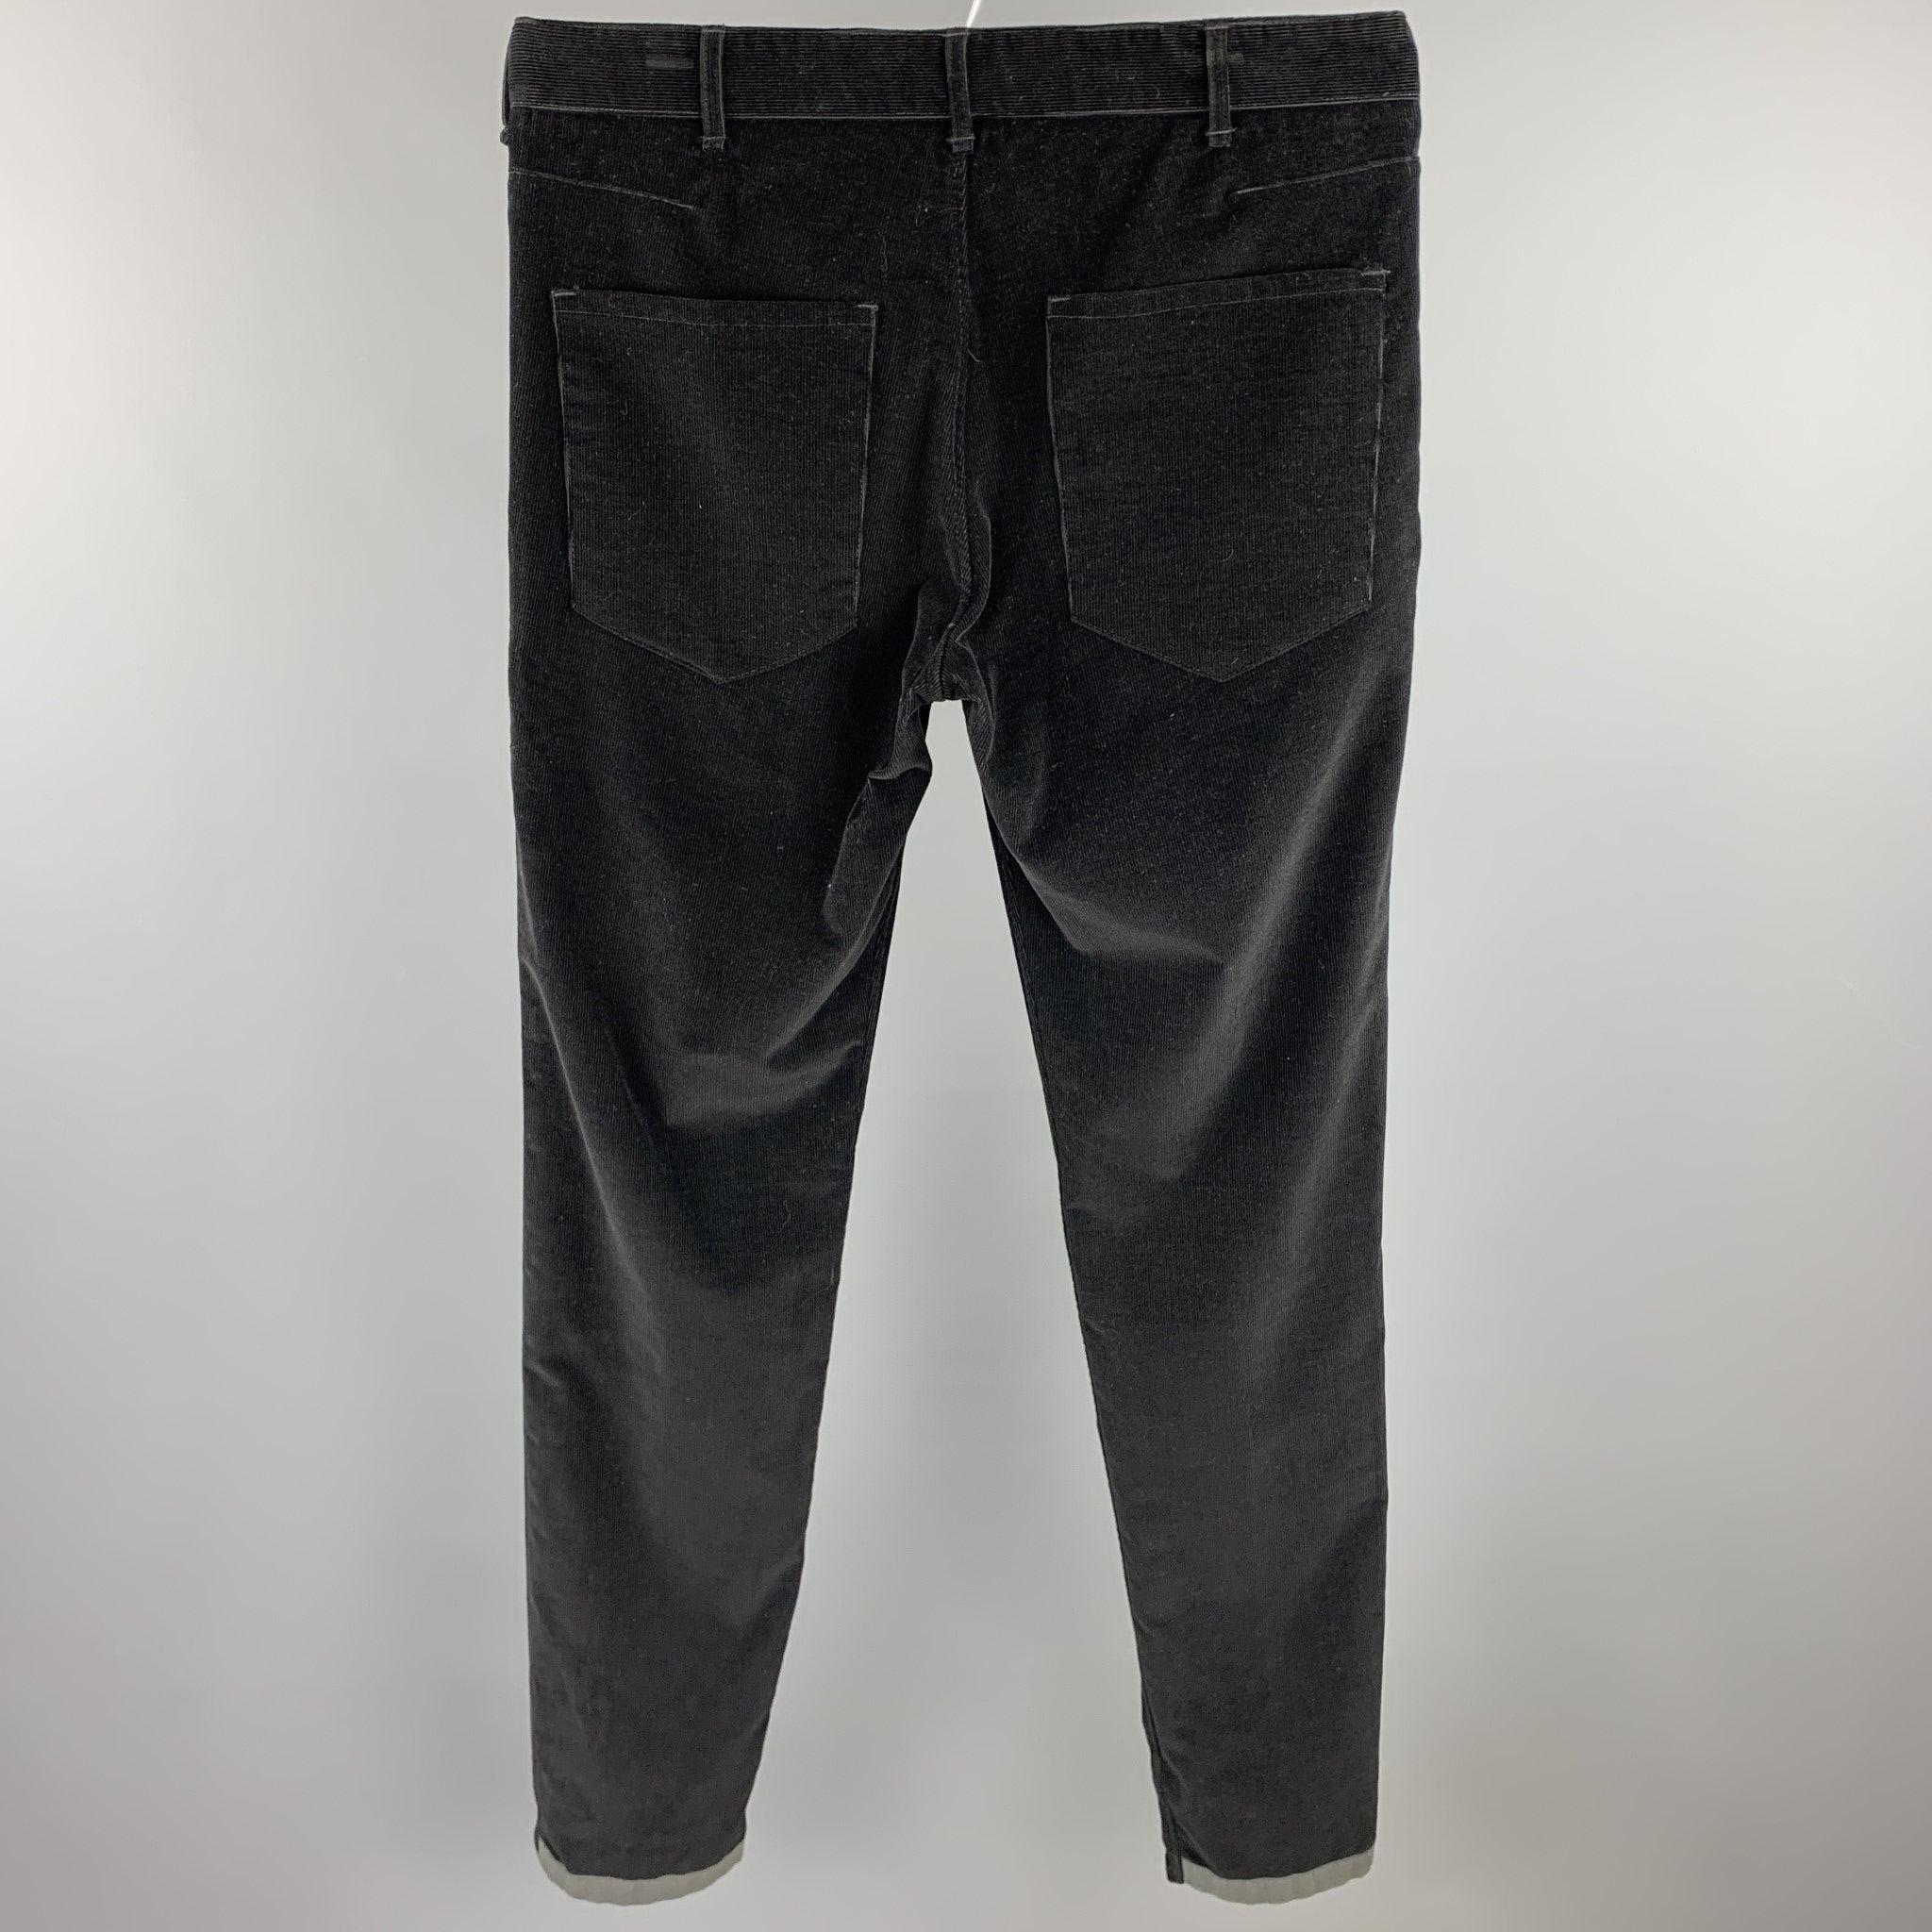 RAG & BONE casual pants comes in a black corduroy with a gray trim featuring a slim fit and button fly closure.Excellent
Pre-Owned Condition. 

Marked:   32 

Measurements: 
  Waist: 32 inches 
Rise: 9.5 inches 
Inseam: 35 inches 
  
  
 
Reference: